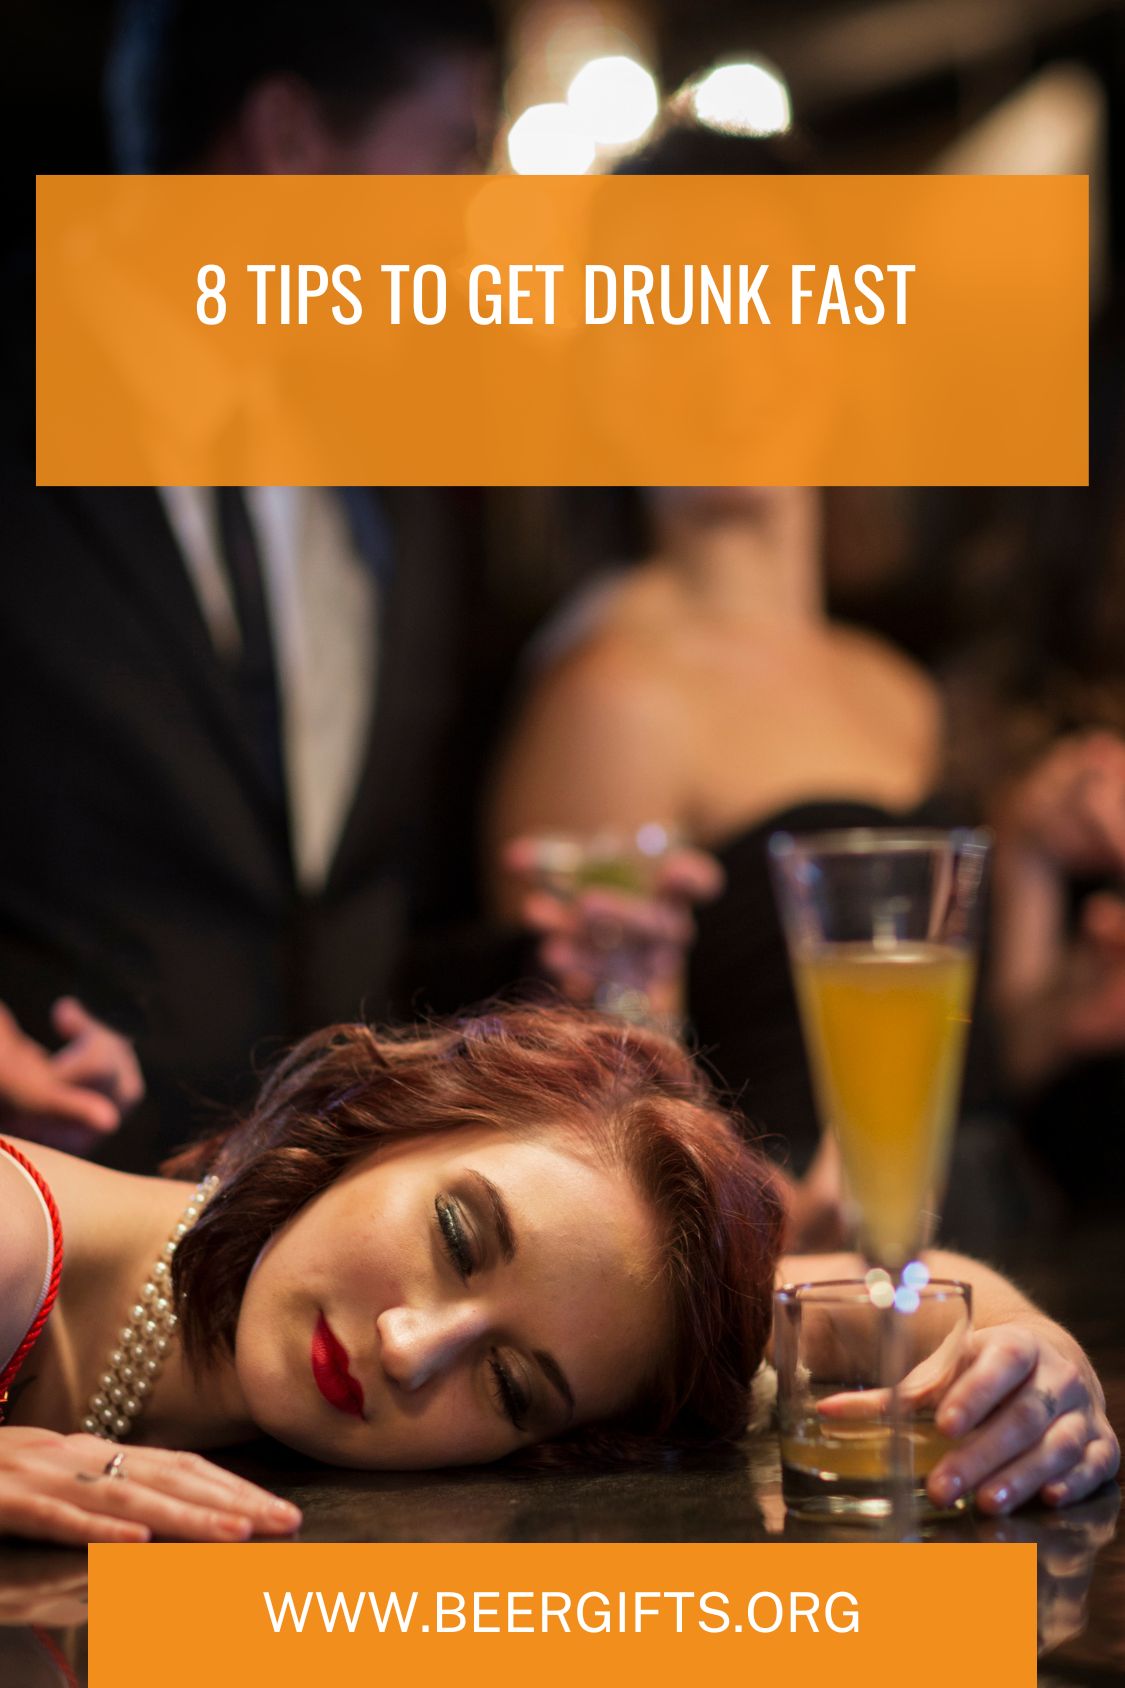 8 Tips to Get Drunk Fast1